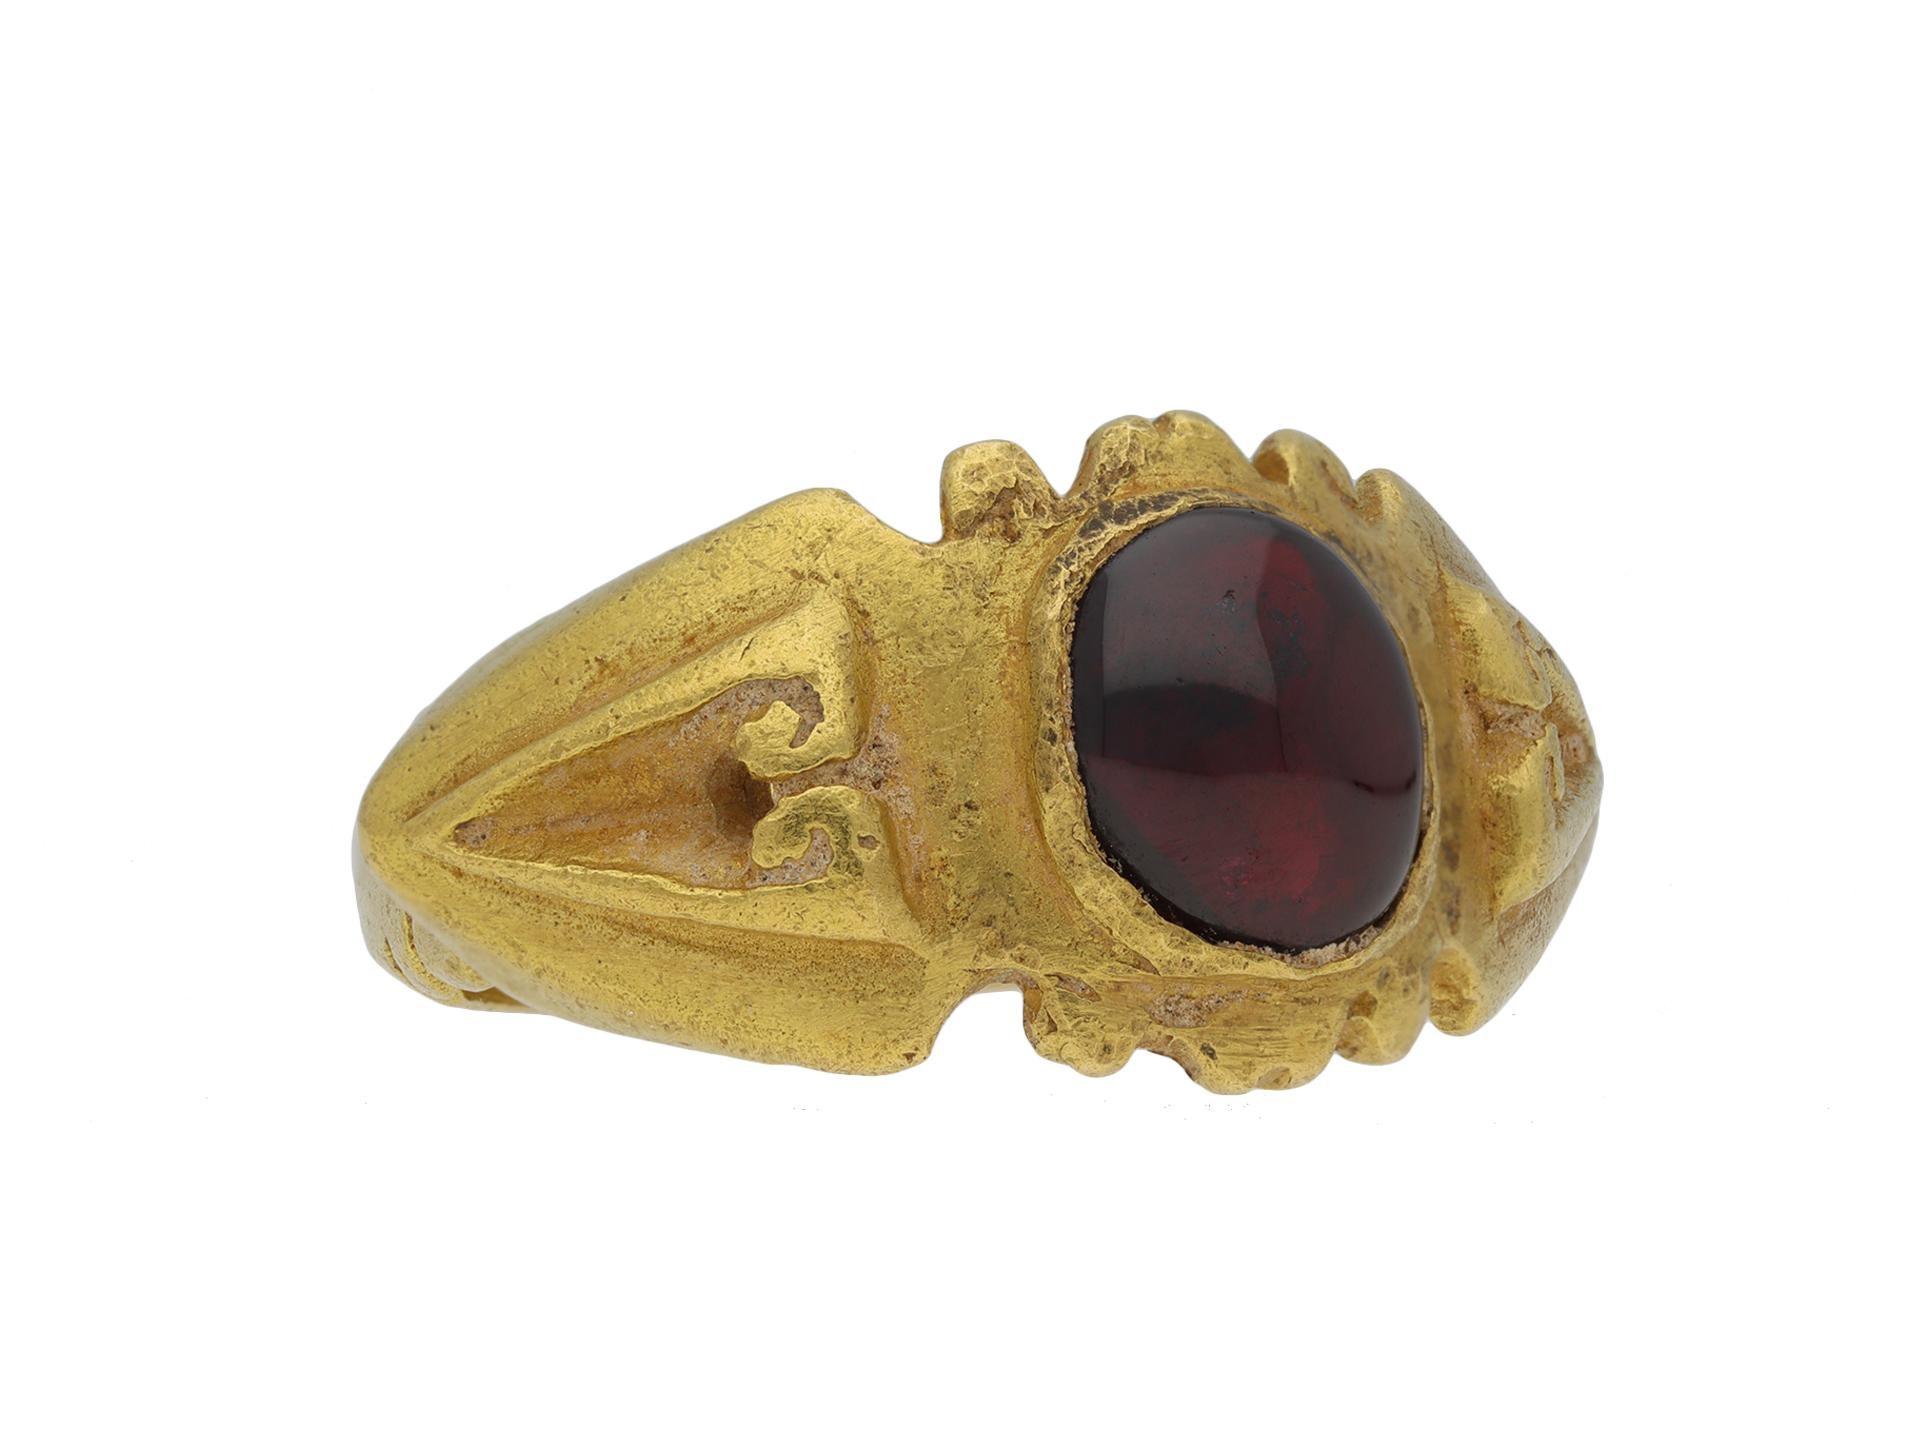 Ancient Roman Syrian garnet signet ring. Set with one central oval cabochon garnet in a rubover setting, to an embellished signet design featuring a shaped bezel, geometric motifs, leading to raised angular shoulders with a scrolling pattern and